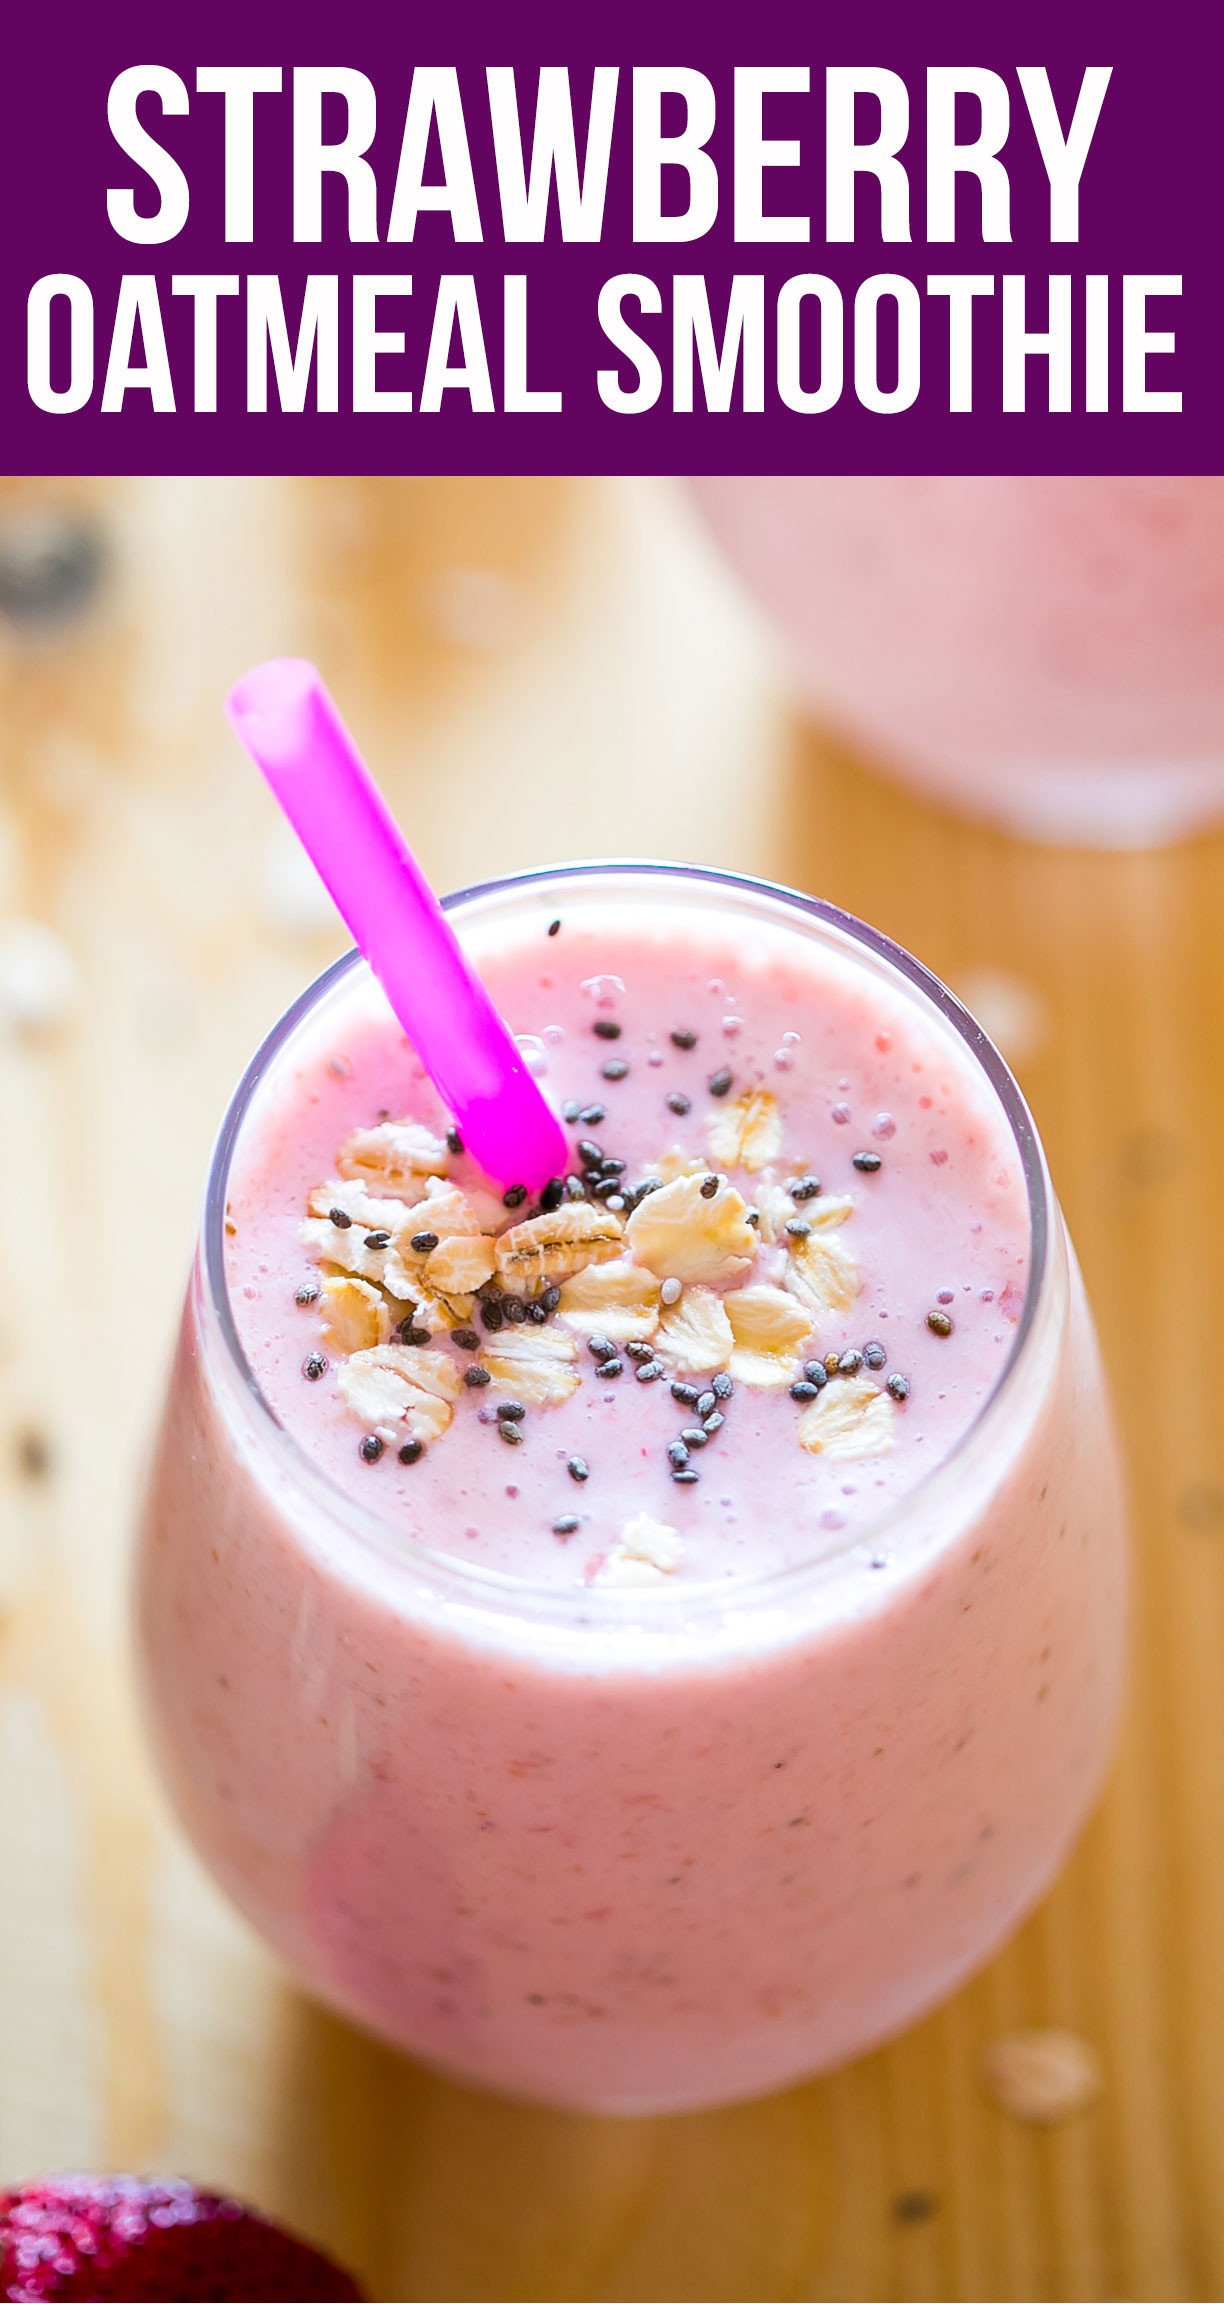 Breakfast Smoothies With Oats
 Strawberry Oatmeal Breakfast Smoothie Recipe